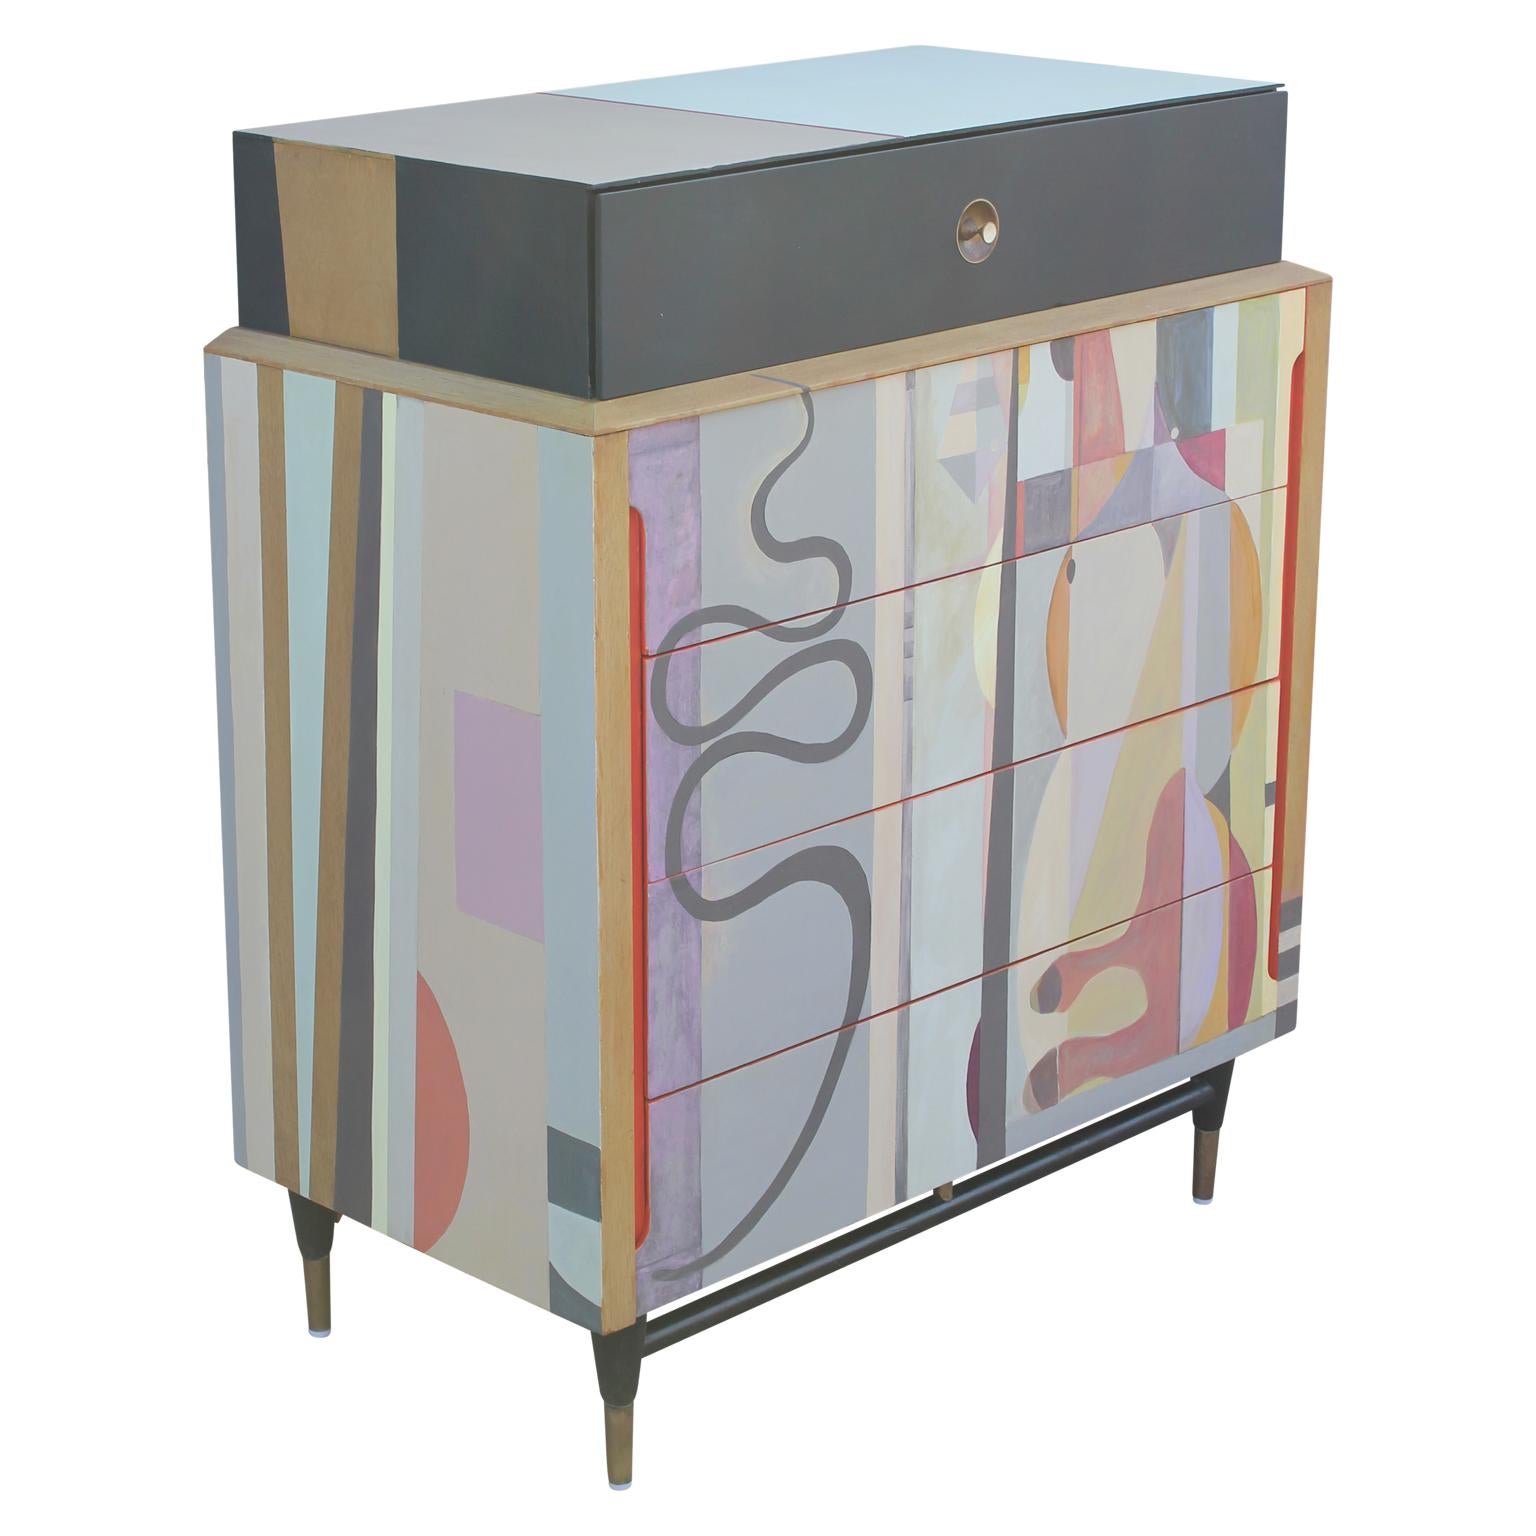 A beautiful modern chest painted in a colorful custom abstract design. This whimsical design will brighten up any room.